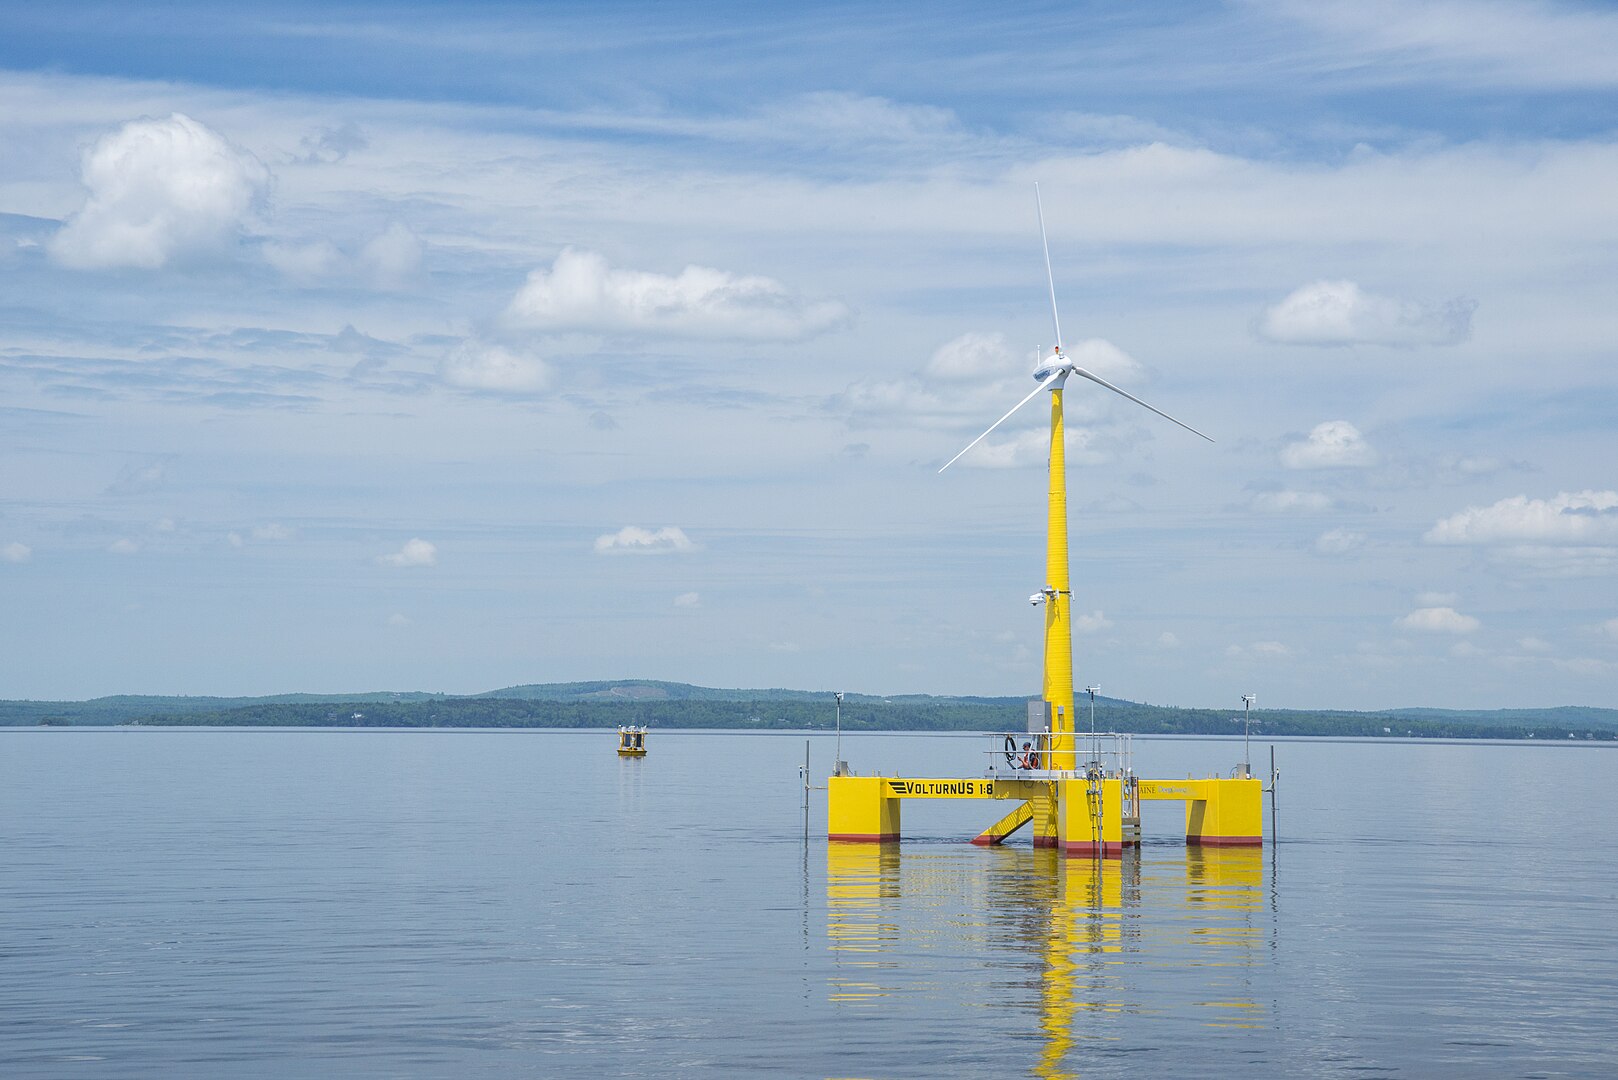 A yellow floating wind turbine on a calm sea under a cloudy blue sky, with distant land visible on the horizon.